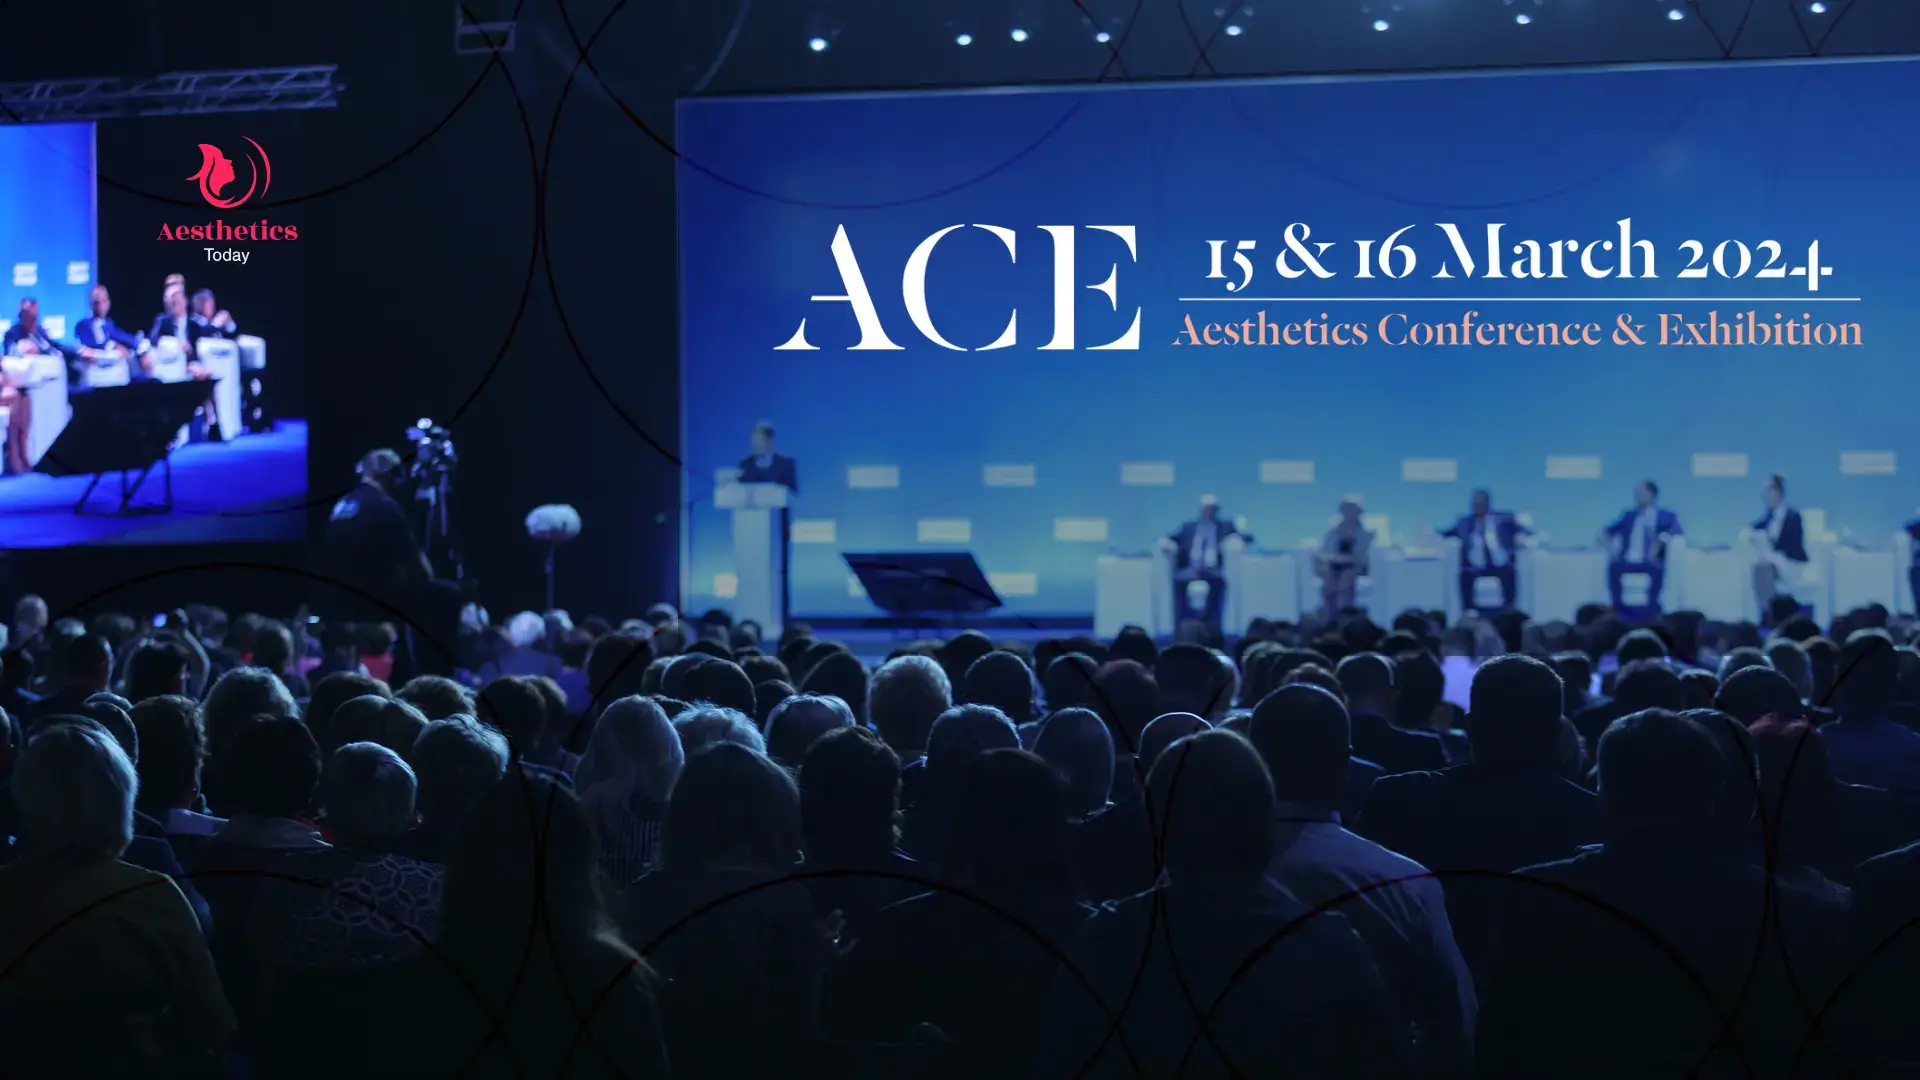 ACE 2024 The Ultimate Aesthetics Conference & Exhibition